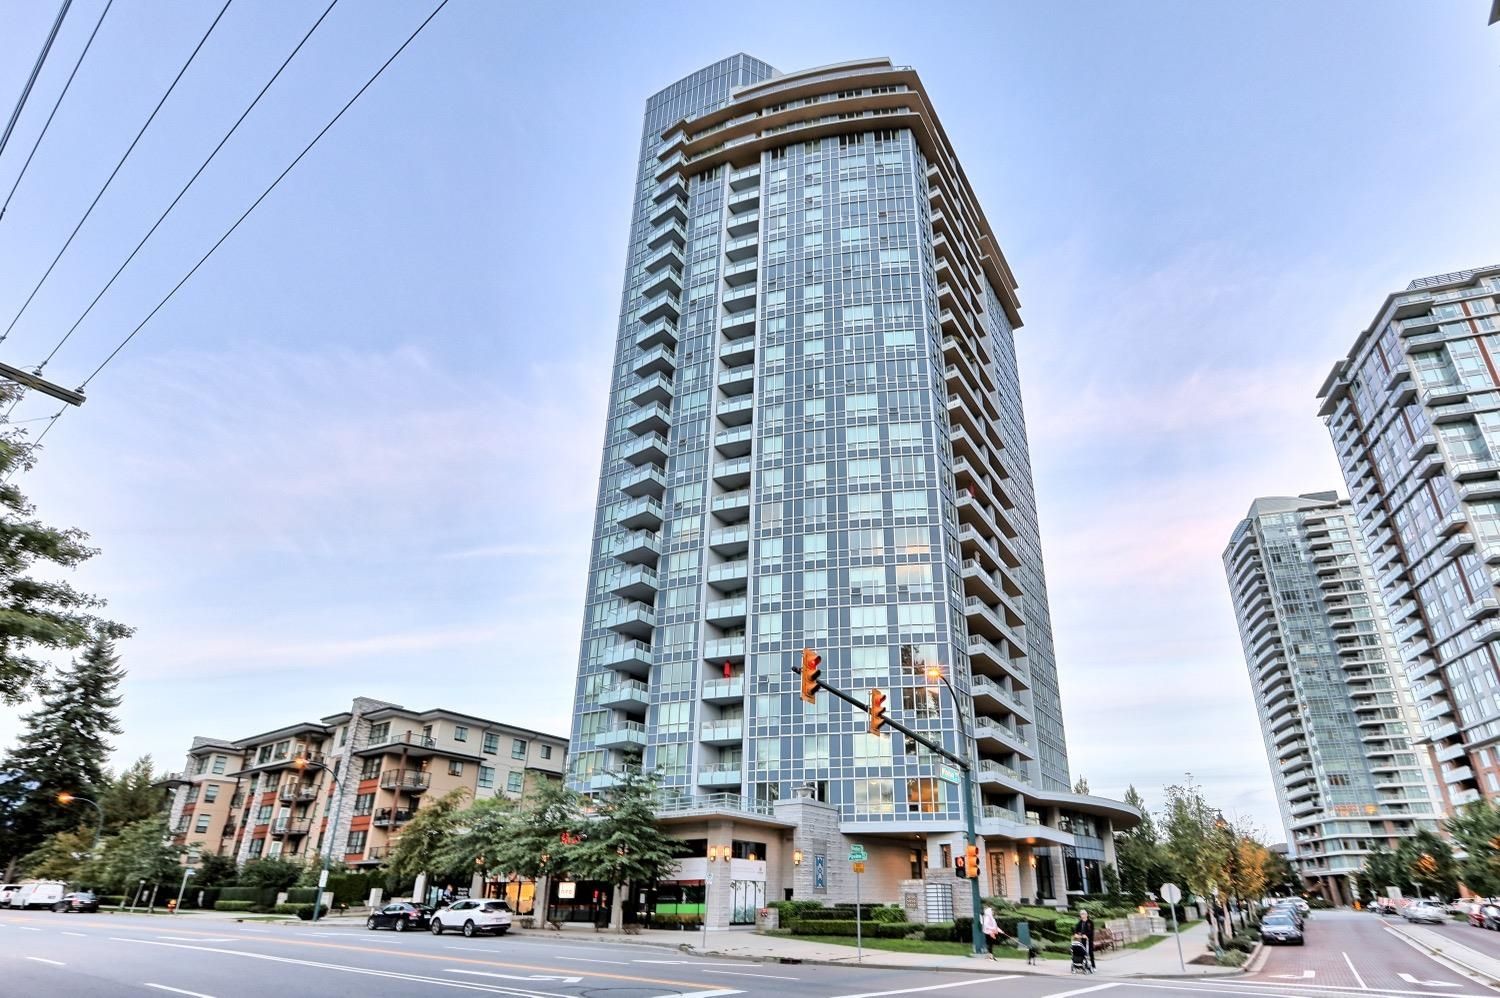 Main Photo: 1706 3093 WINDSOR GATE in Coquitlam: New Horizons Condo for sale : MLS®# R2649916